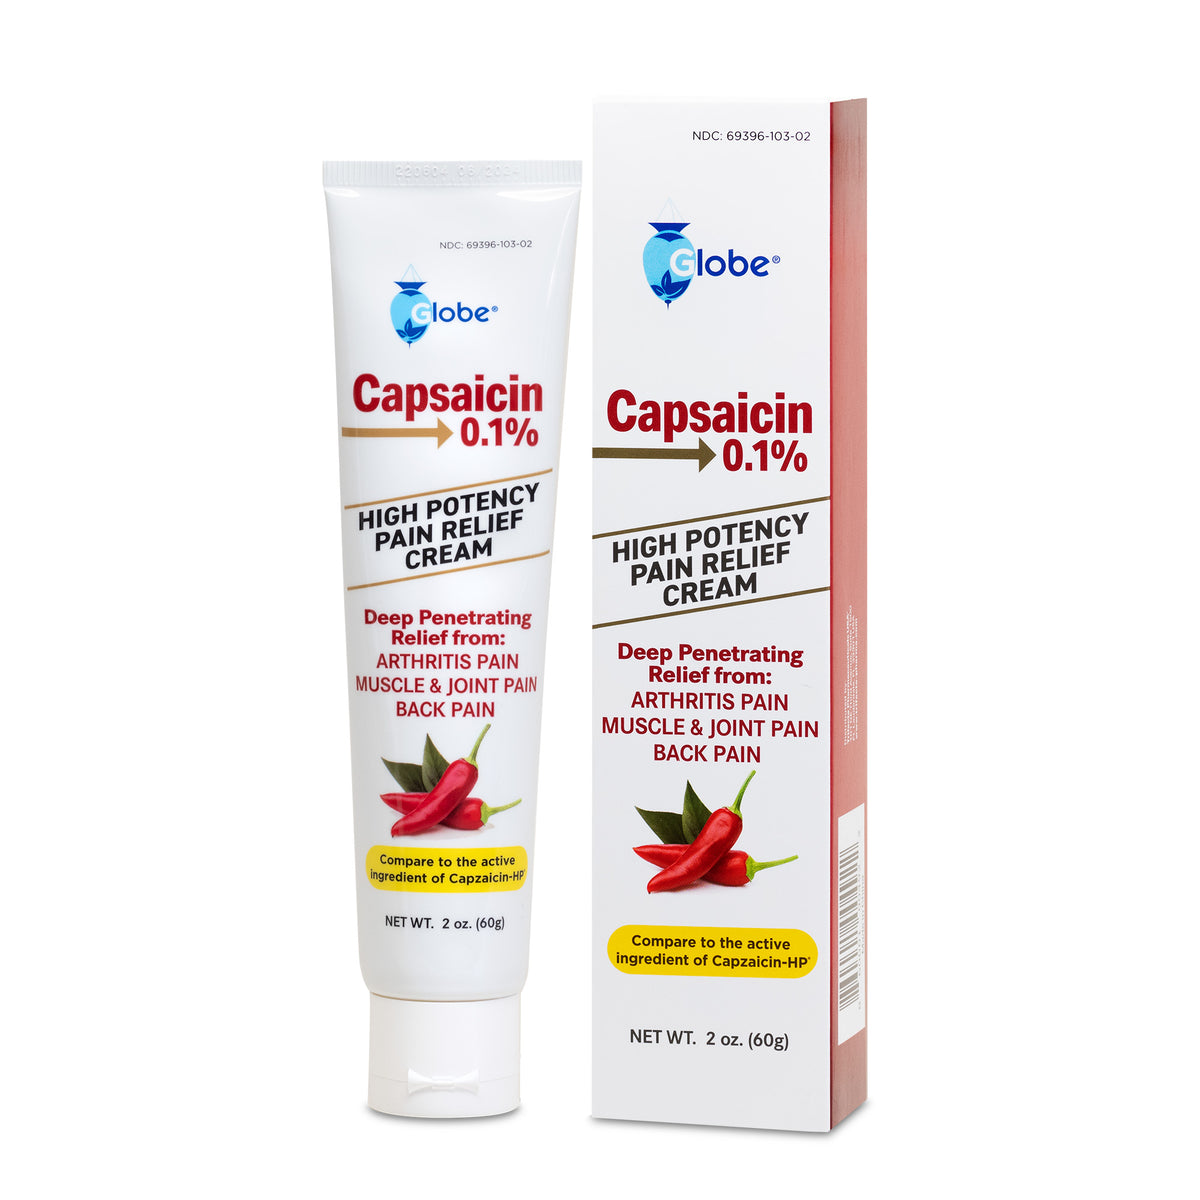 Globe Capsaicin 0.1% High Potency Pain Relief Cream (2 oz). Deep Penetrating Relief from: Arthritis, Muscle, Joint and Back Pain